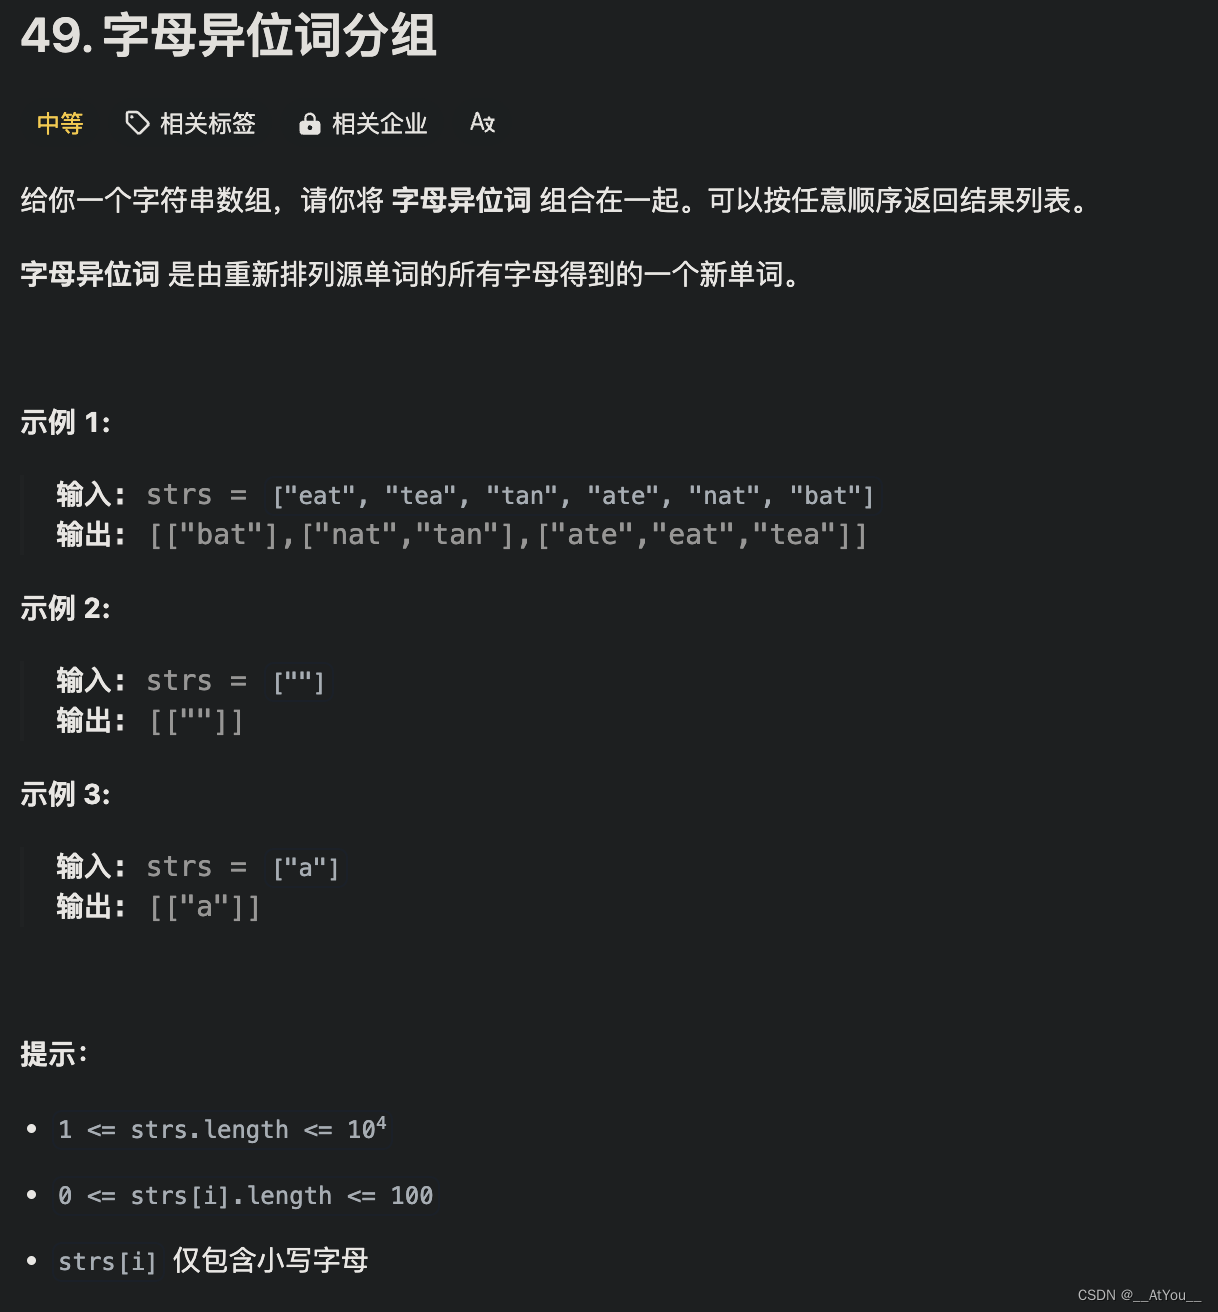 Golang | <span style='color:red;'>Leetcode</span> Golang题解之<span style='color:red;'>第</span><span style='color:red;'>49</span><span style='color:red;'>题</span><span style='color:red;'>字母</span><span style='color:red;'>异</span><span style='color:red;'>位</span><span style='color:red;'>词</span><span style='color:red;'>分组</span>